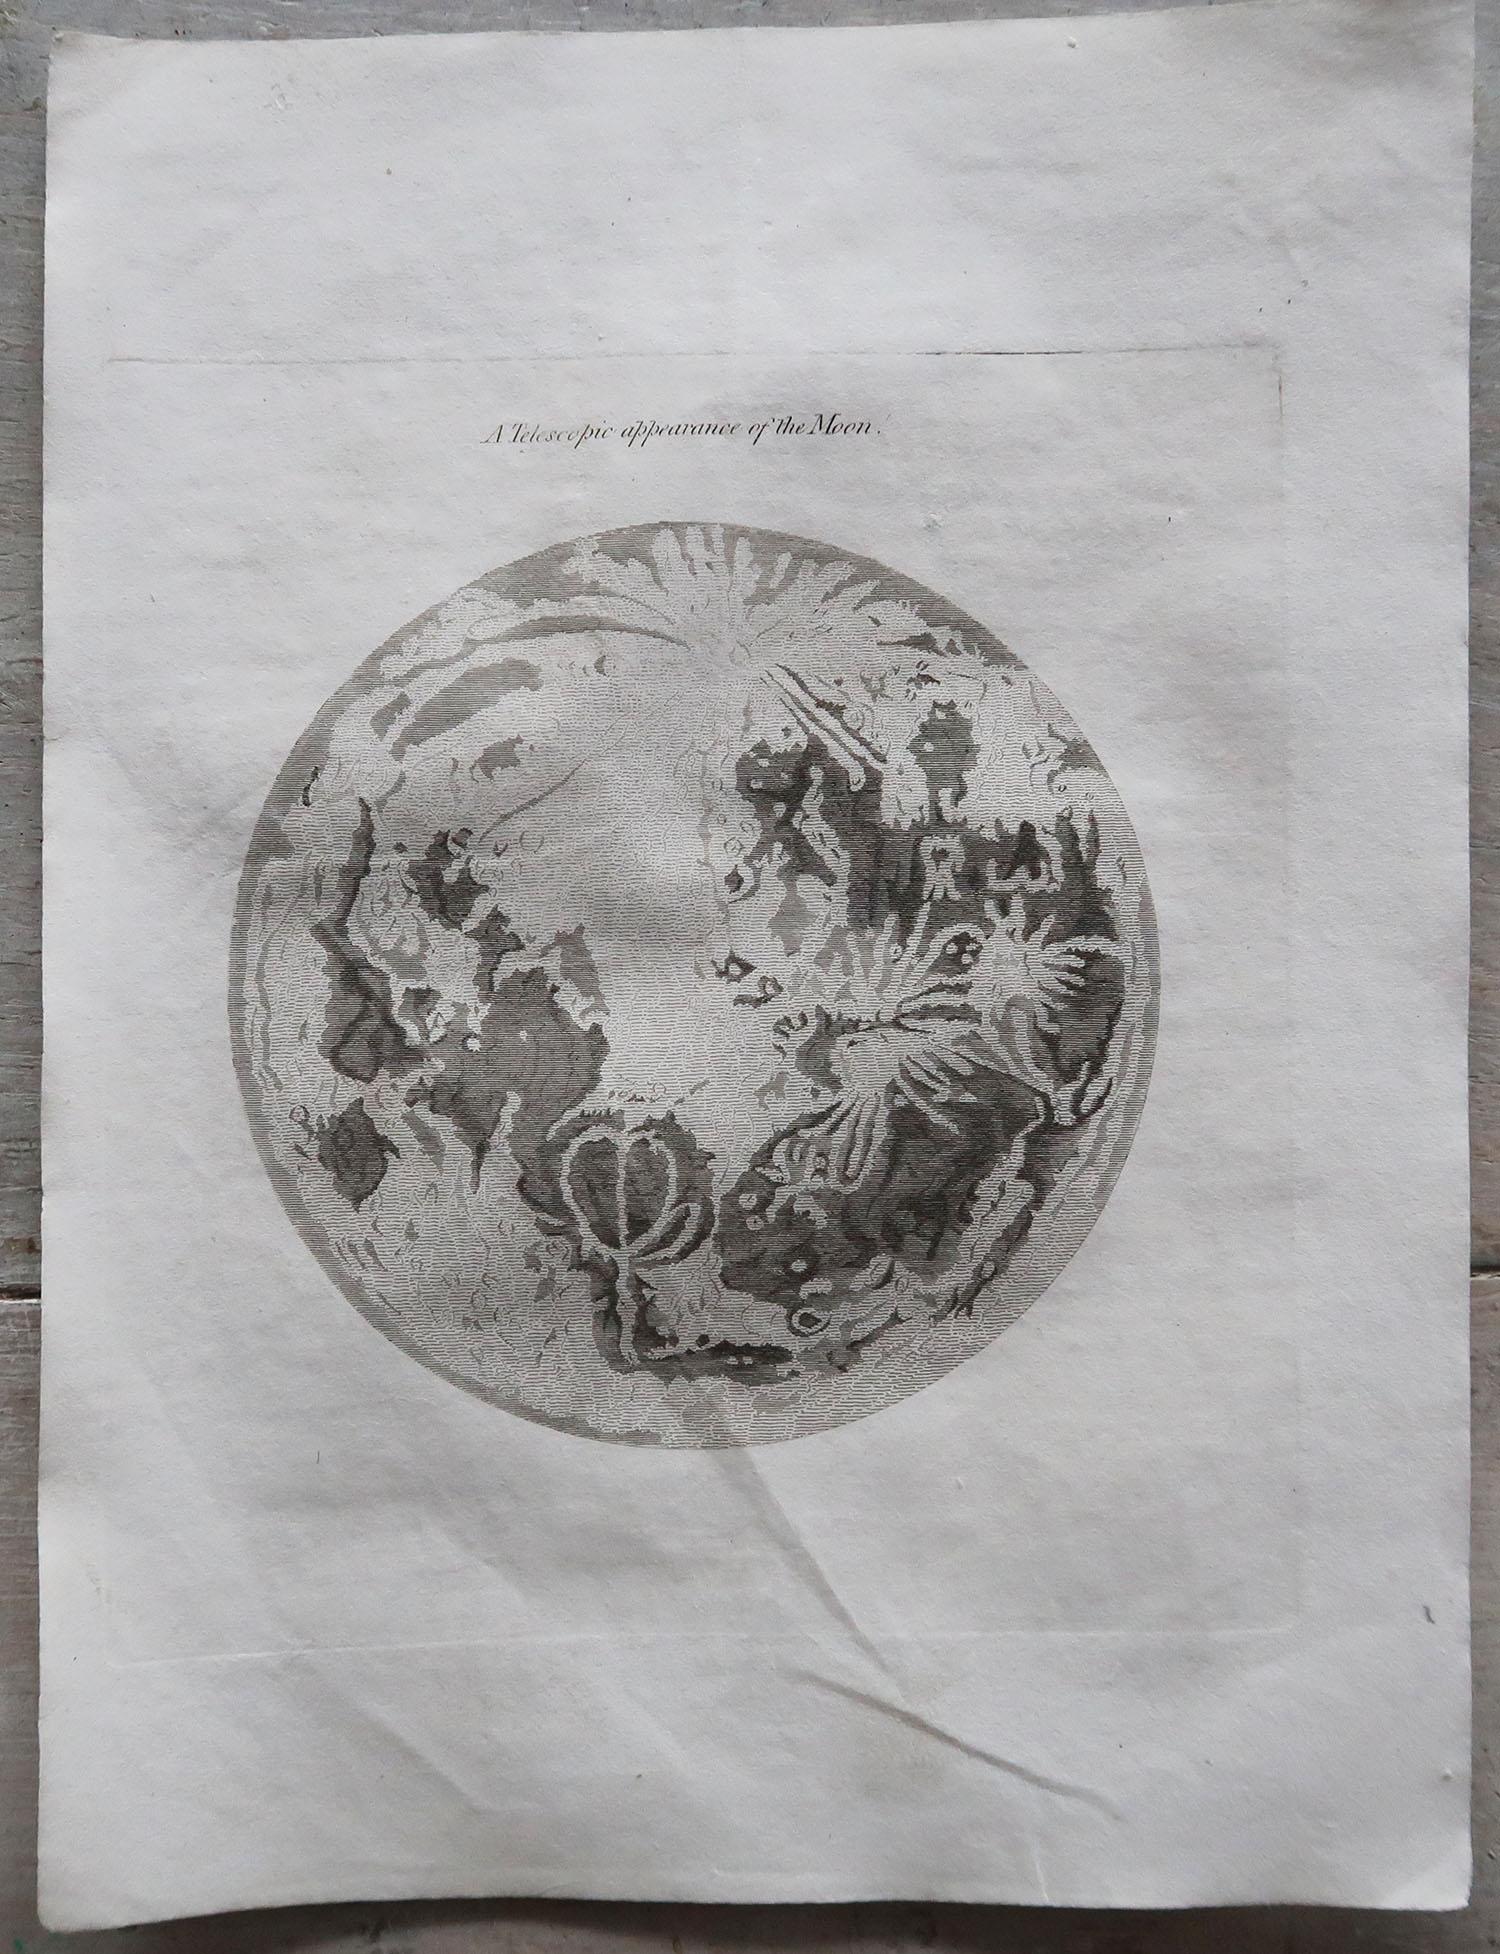 English Original Antique Map of the Moon, Dated 1812